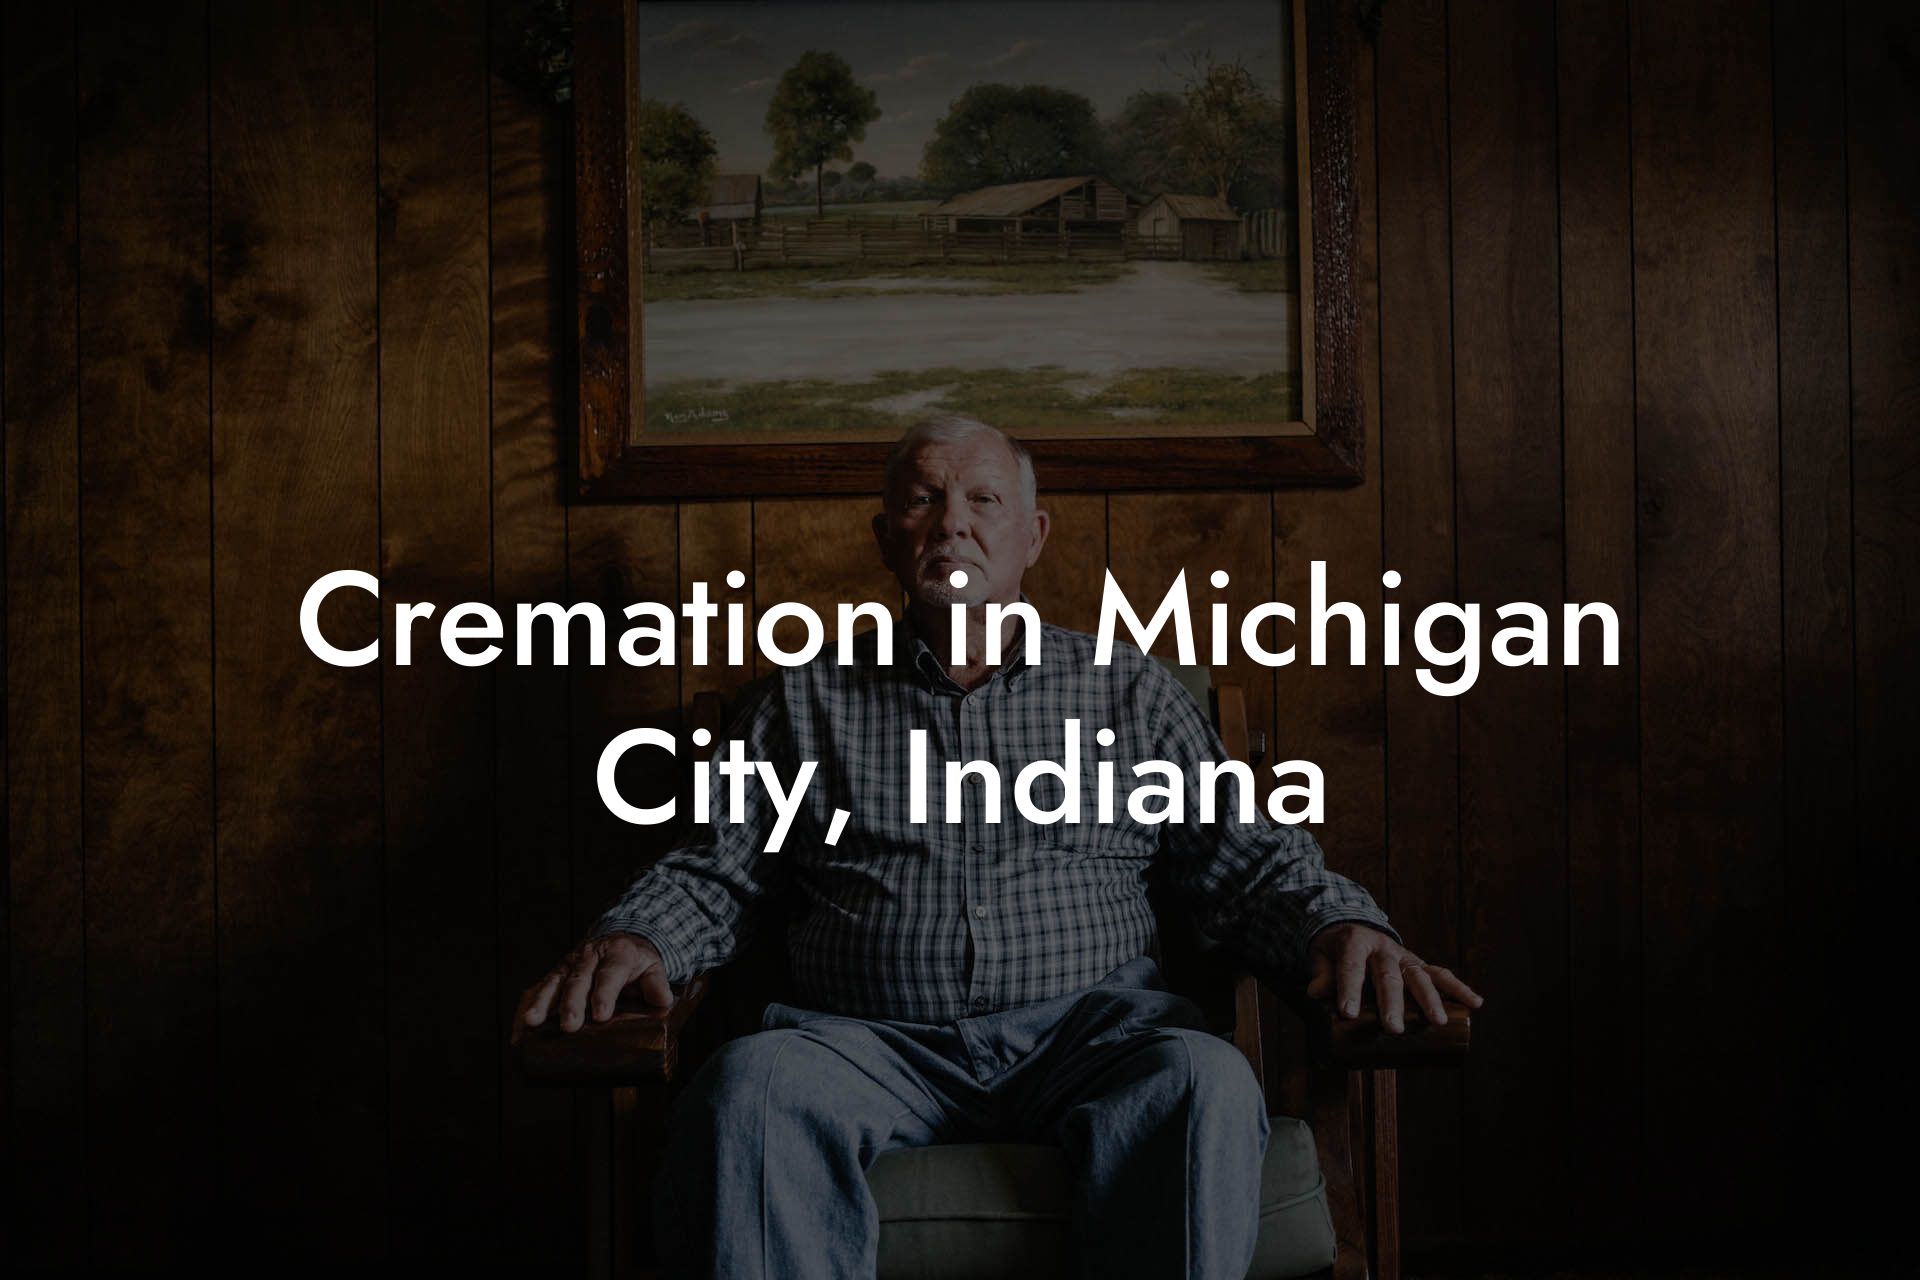 Cremation in Michigan City, Indiana